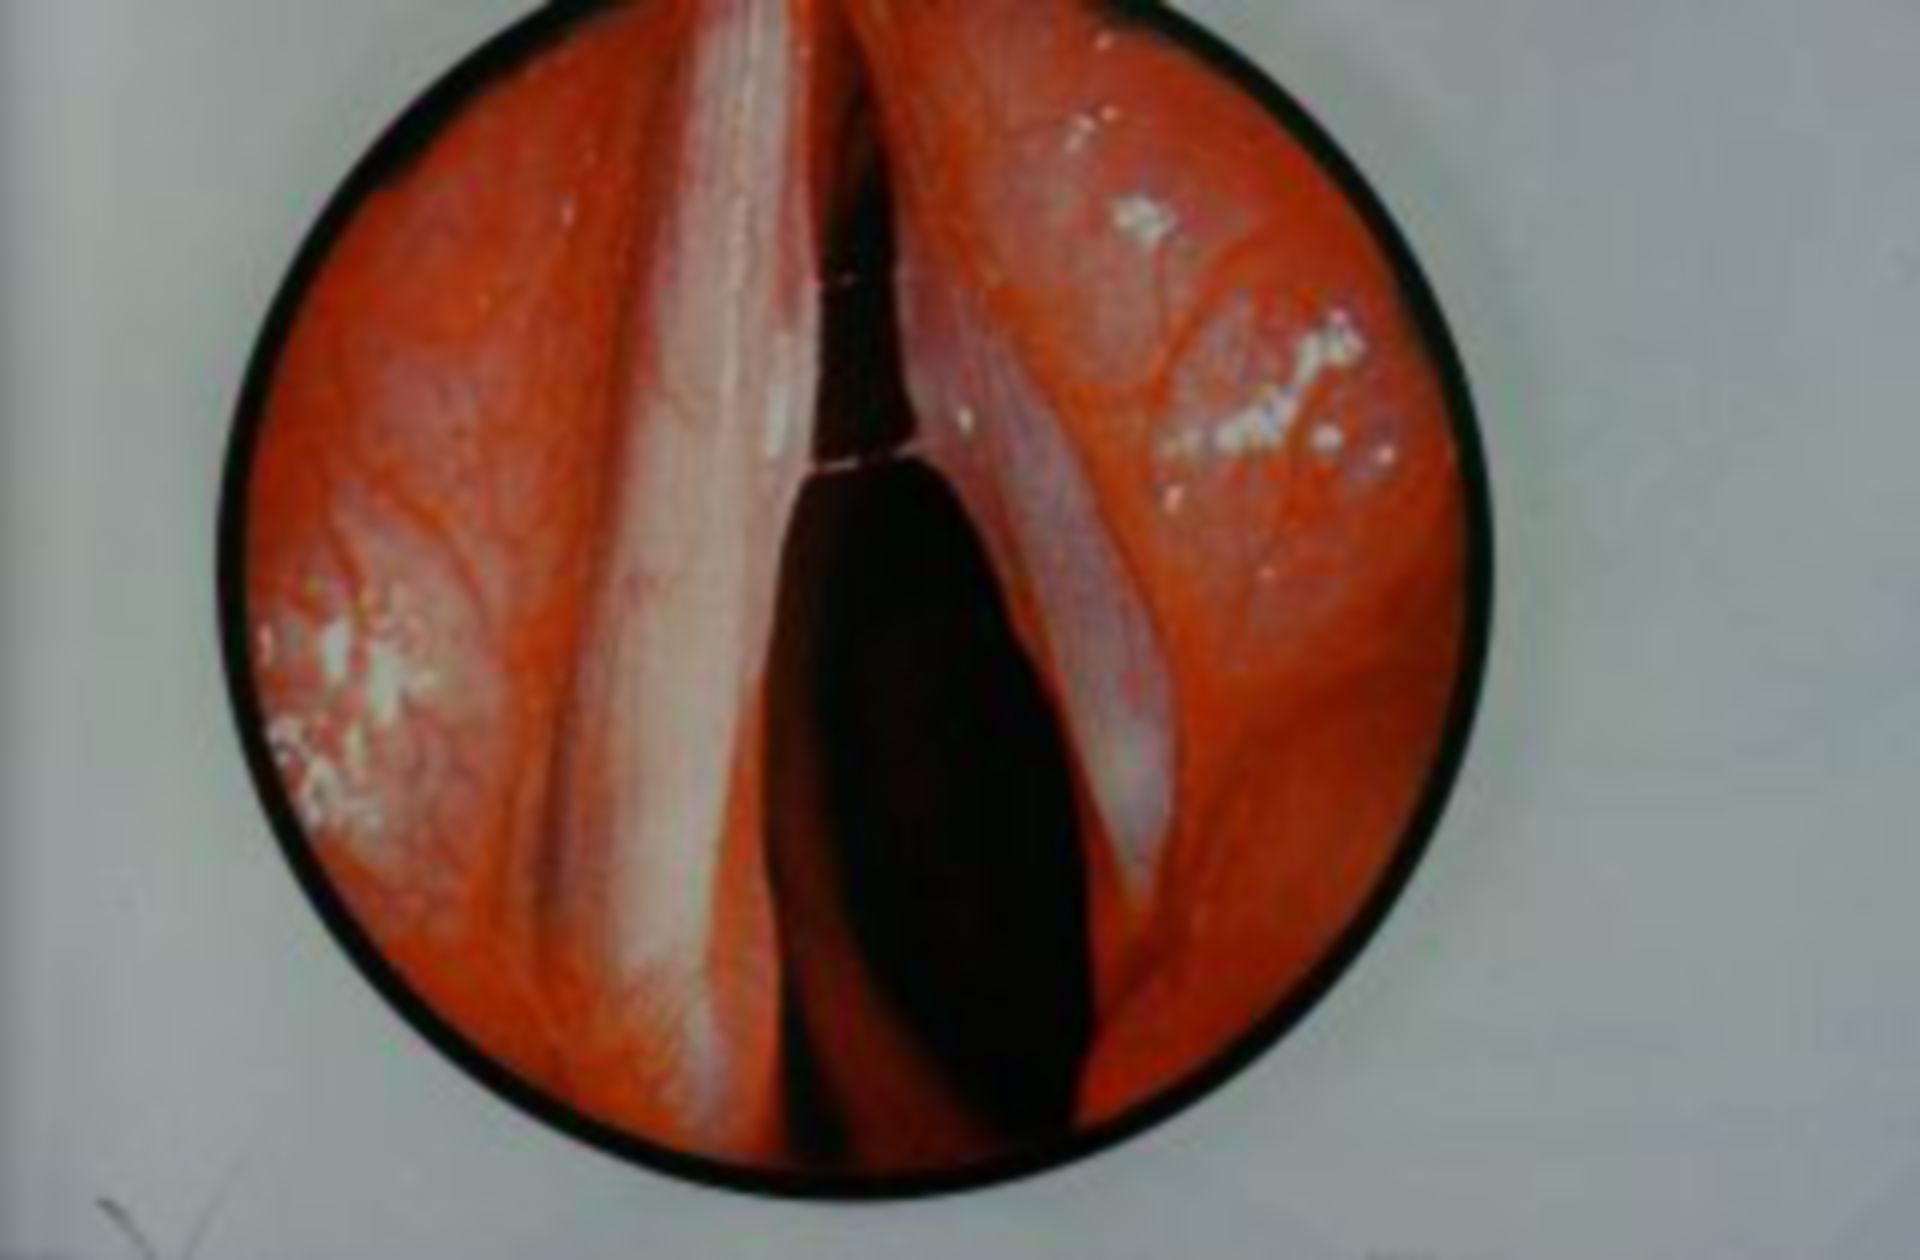 Unilateral vocal cord paralysis